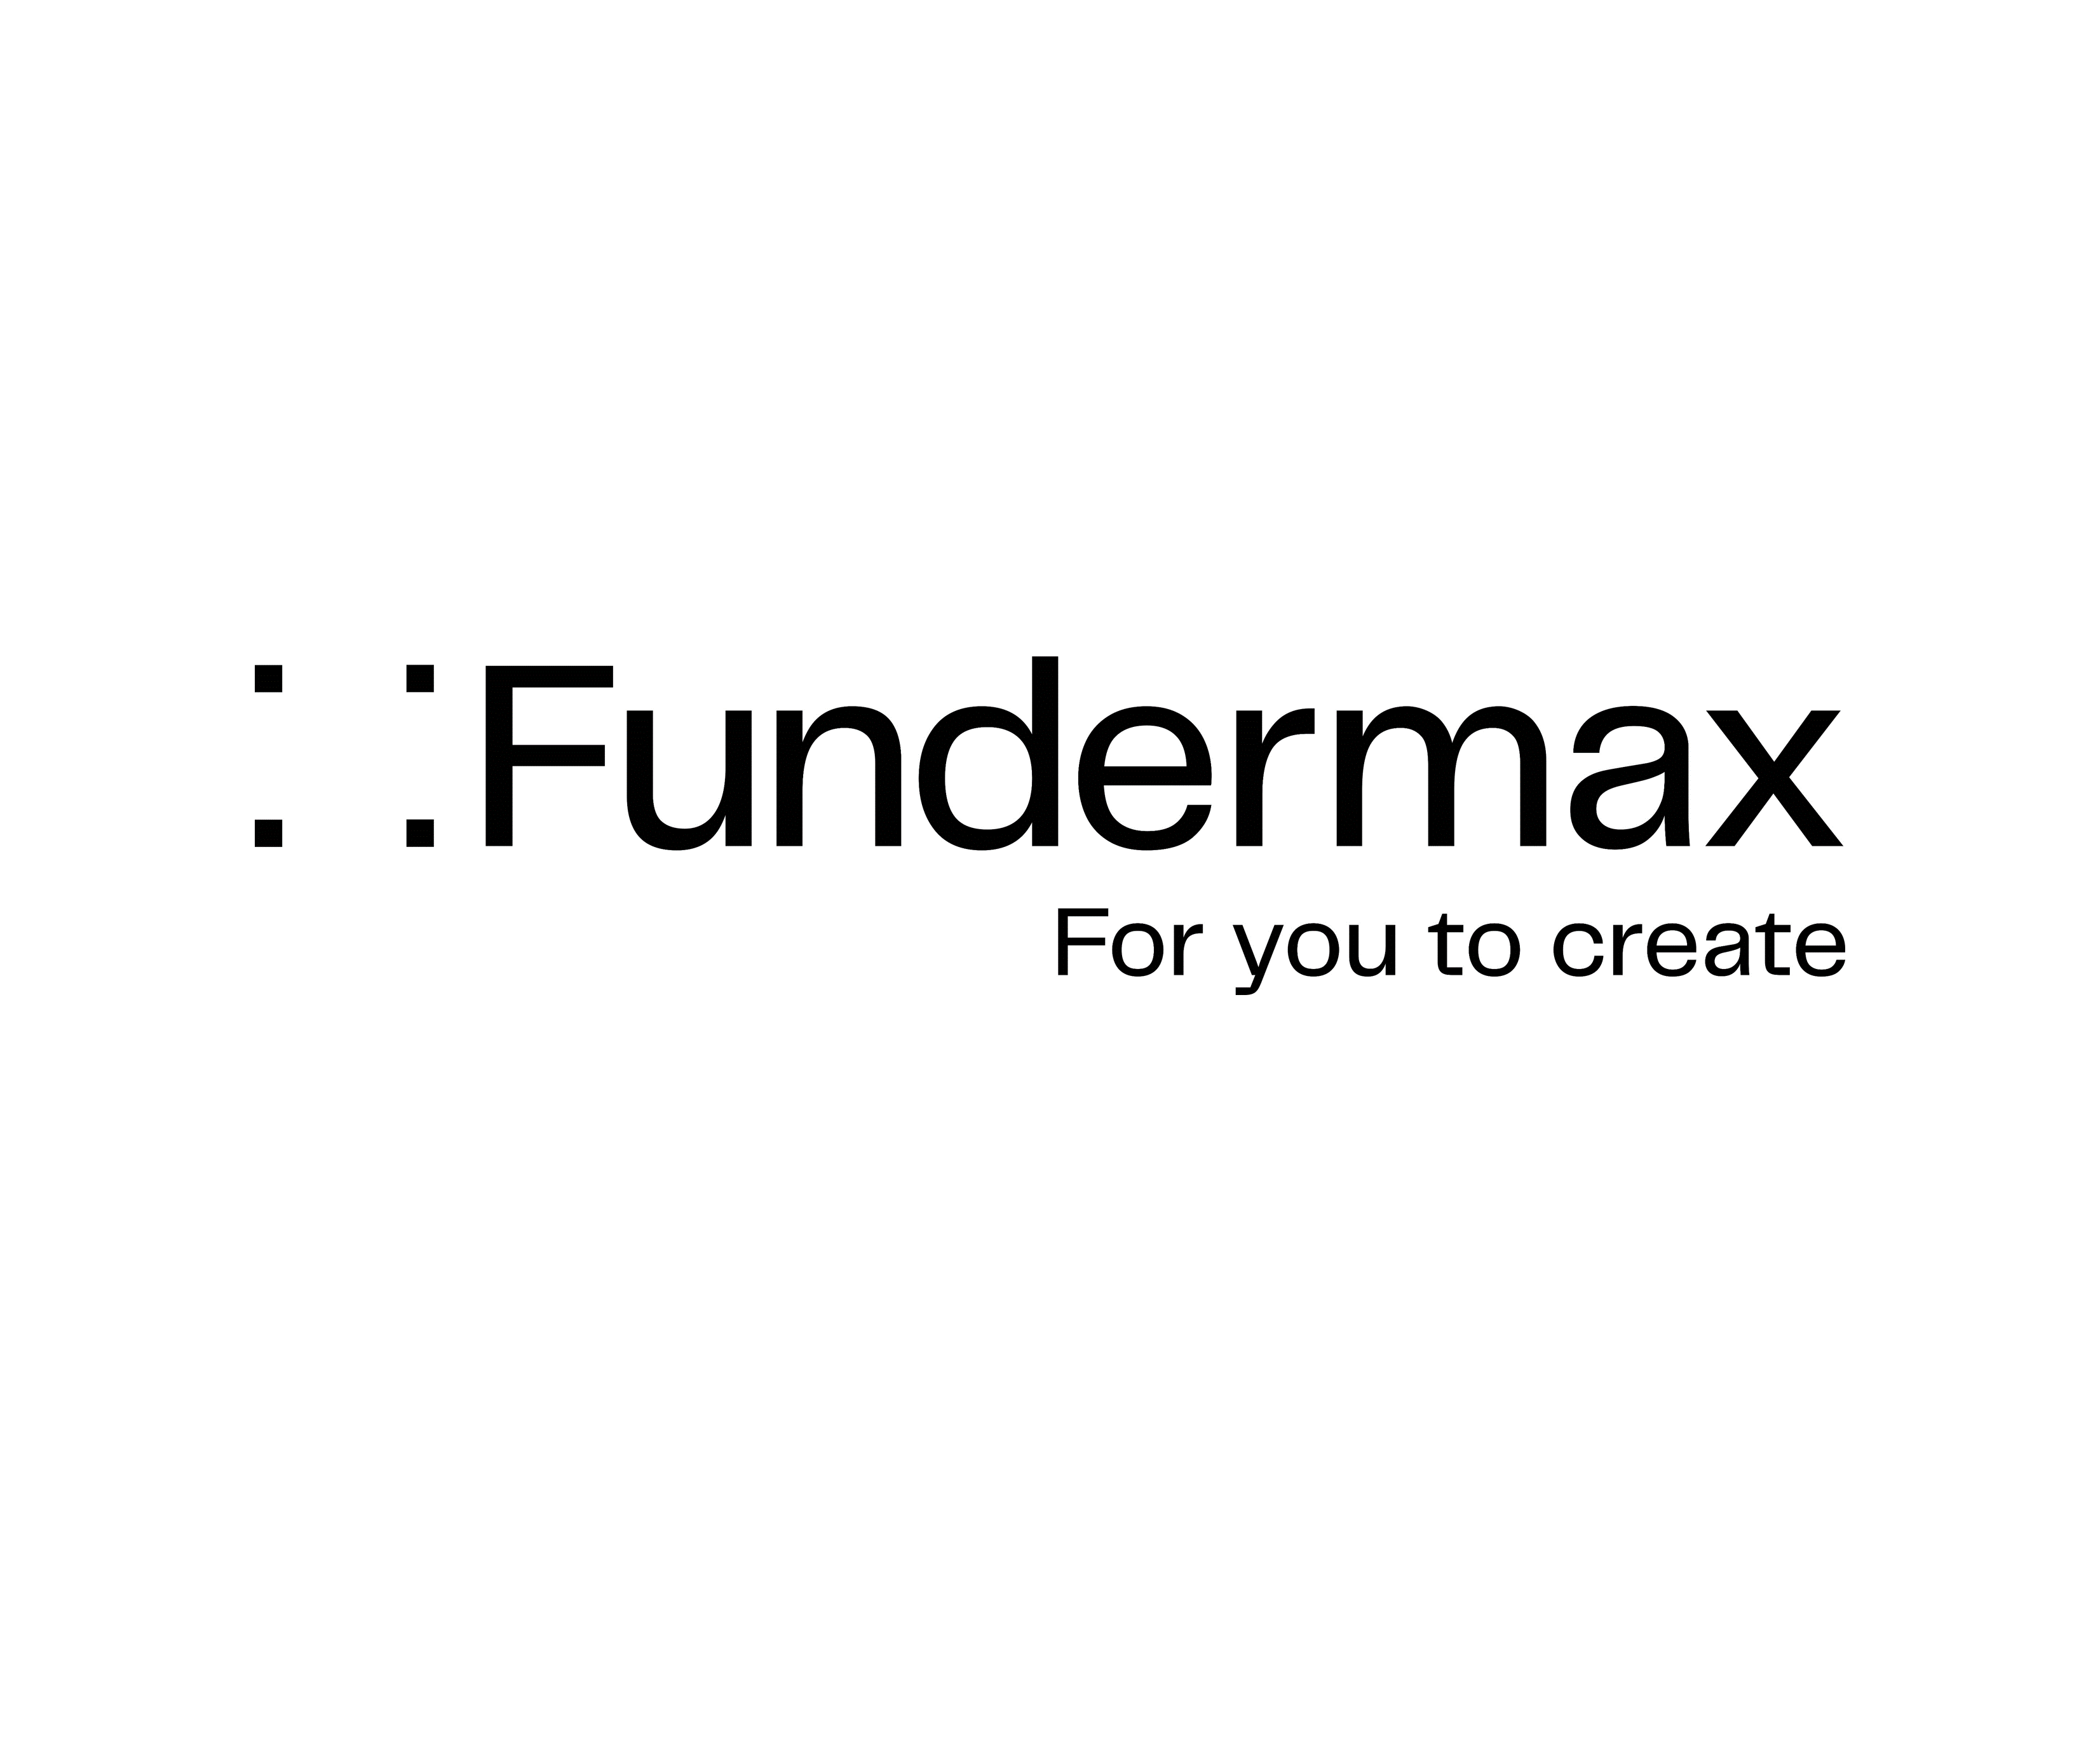 Fundermax-Website-1 About us  